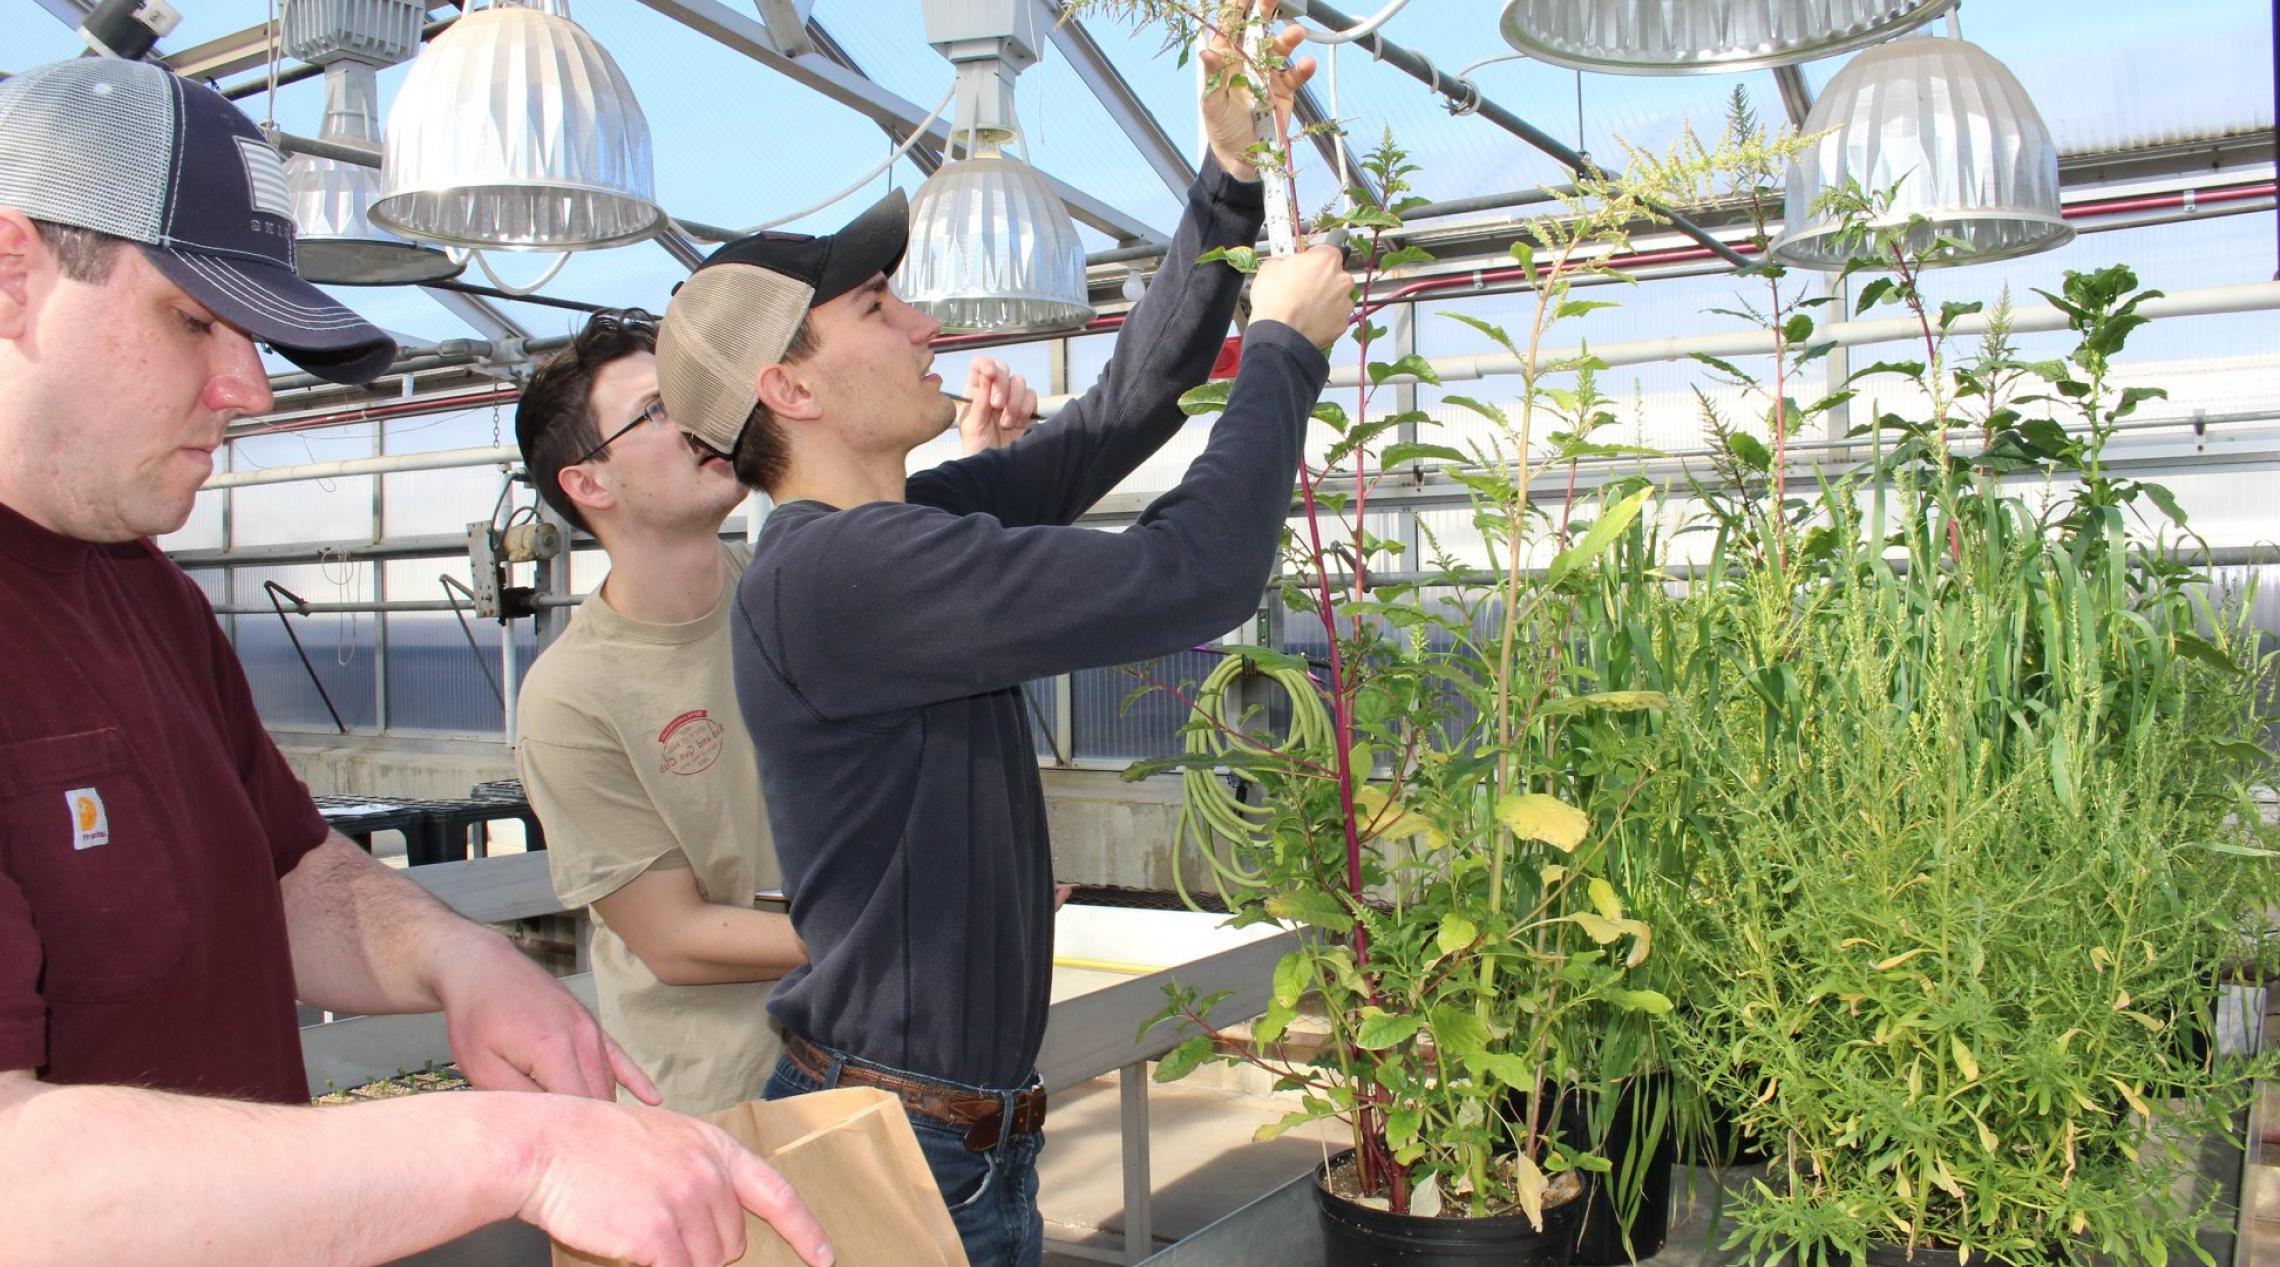 students harvesting a plant in a green house